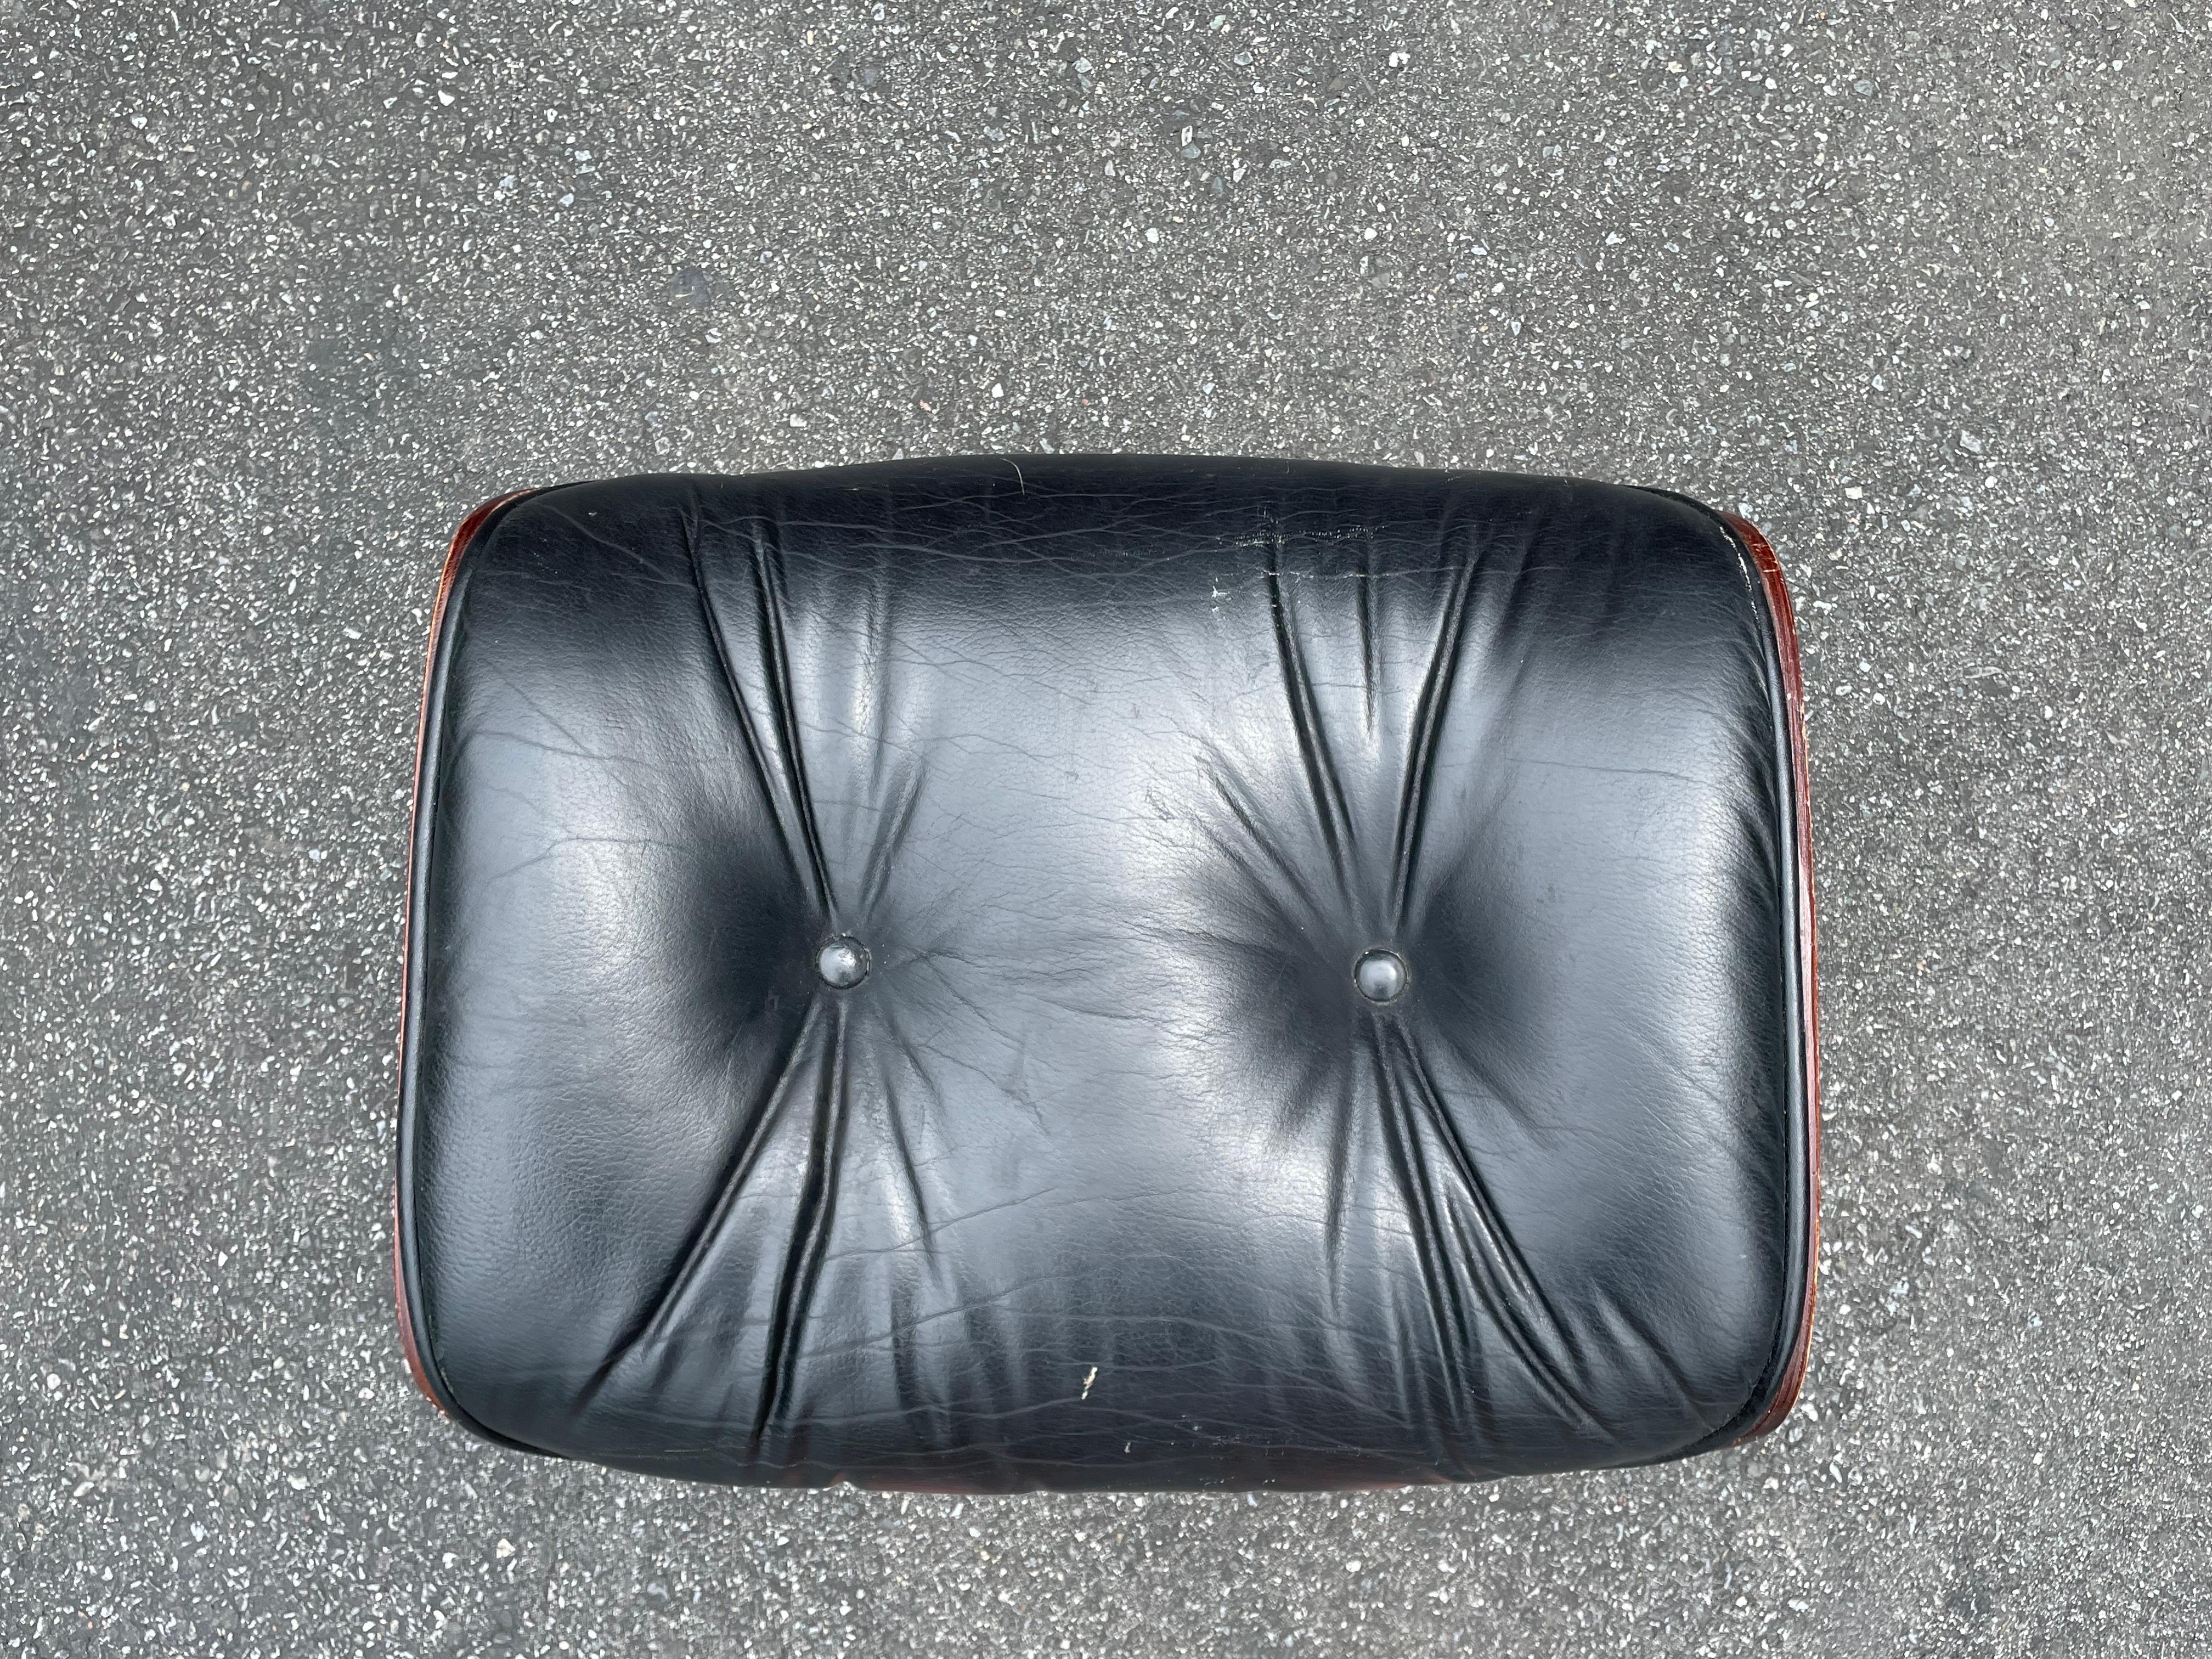 20th Century Plycraft/Selig/Eames Style Ottoman in Black Leather or Vinyl and Walnut